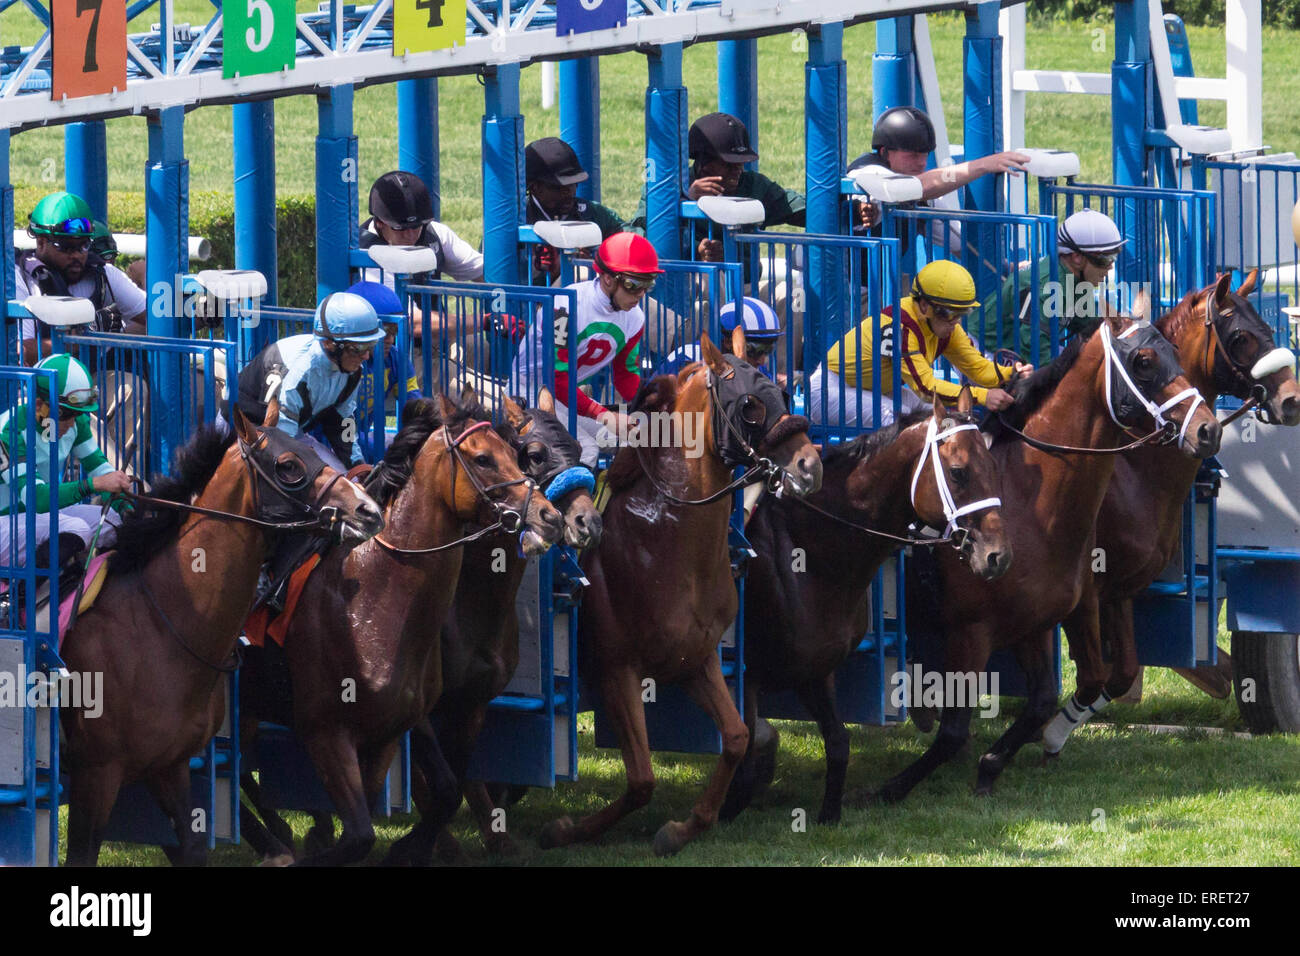 Starting Gates- race horses rearing to go burst out of their starting positions the moment the gates open at Belmont Park NY Stock Photo